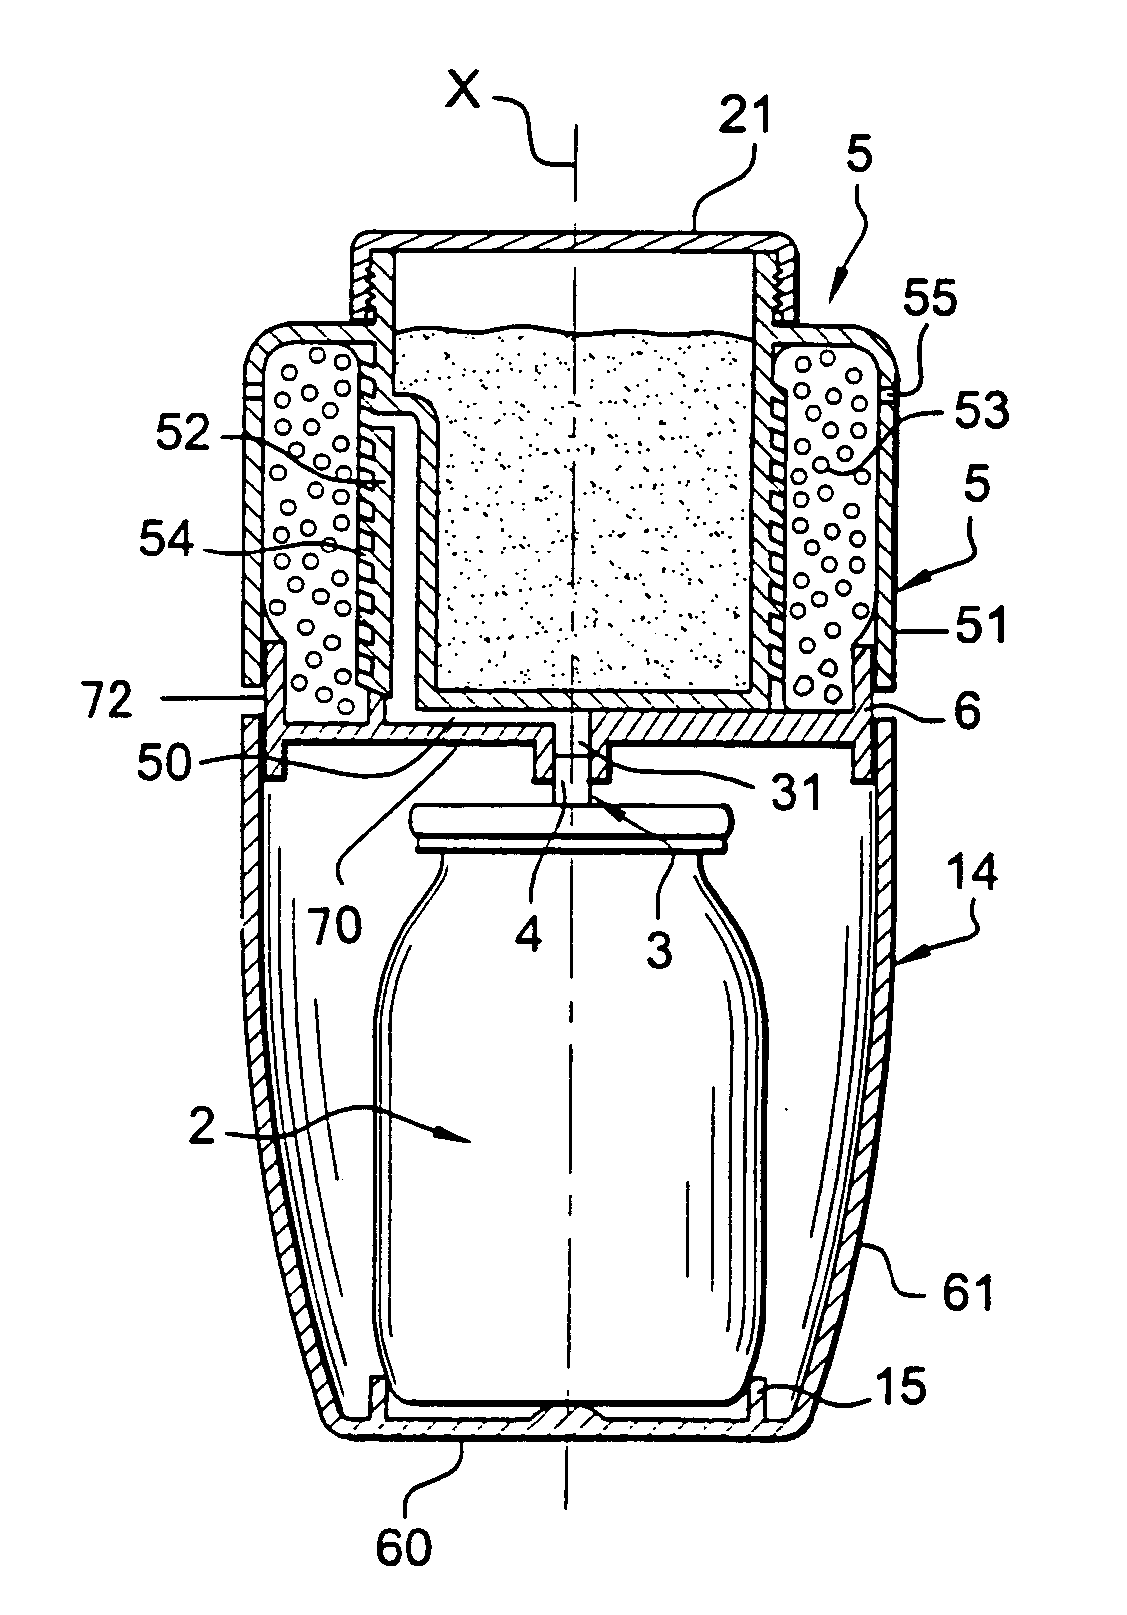 Cooling device for packaging product and packaging assembly